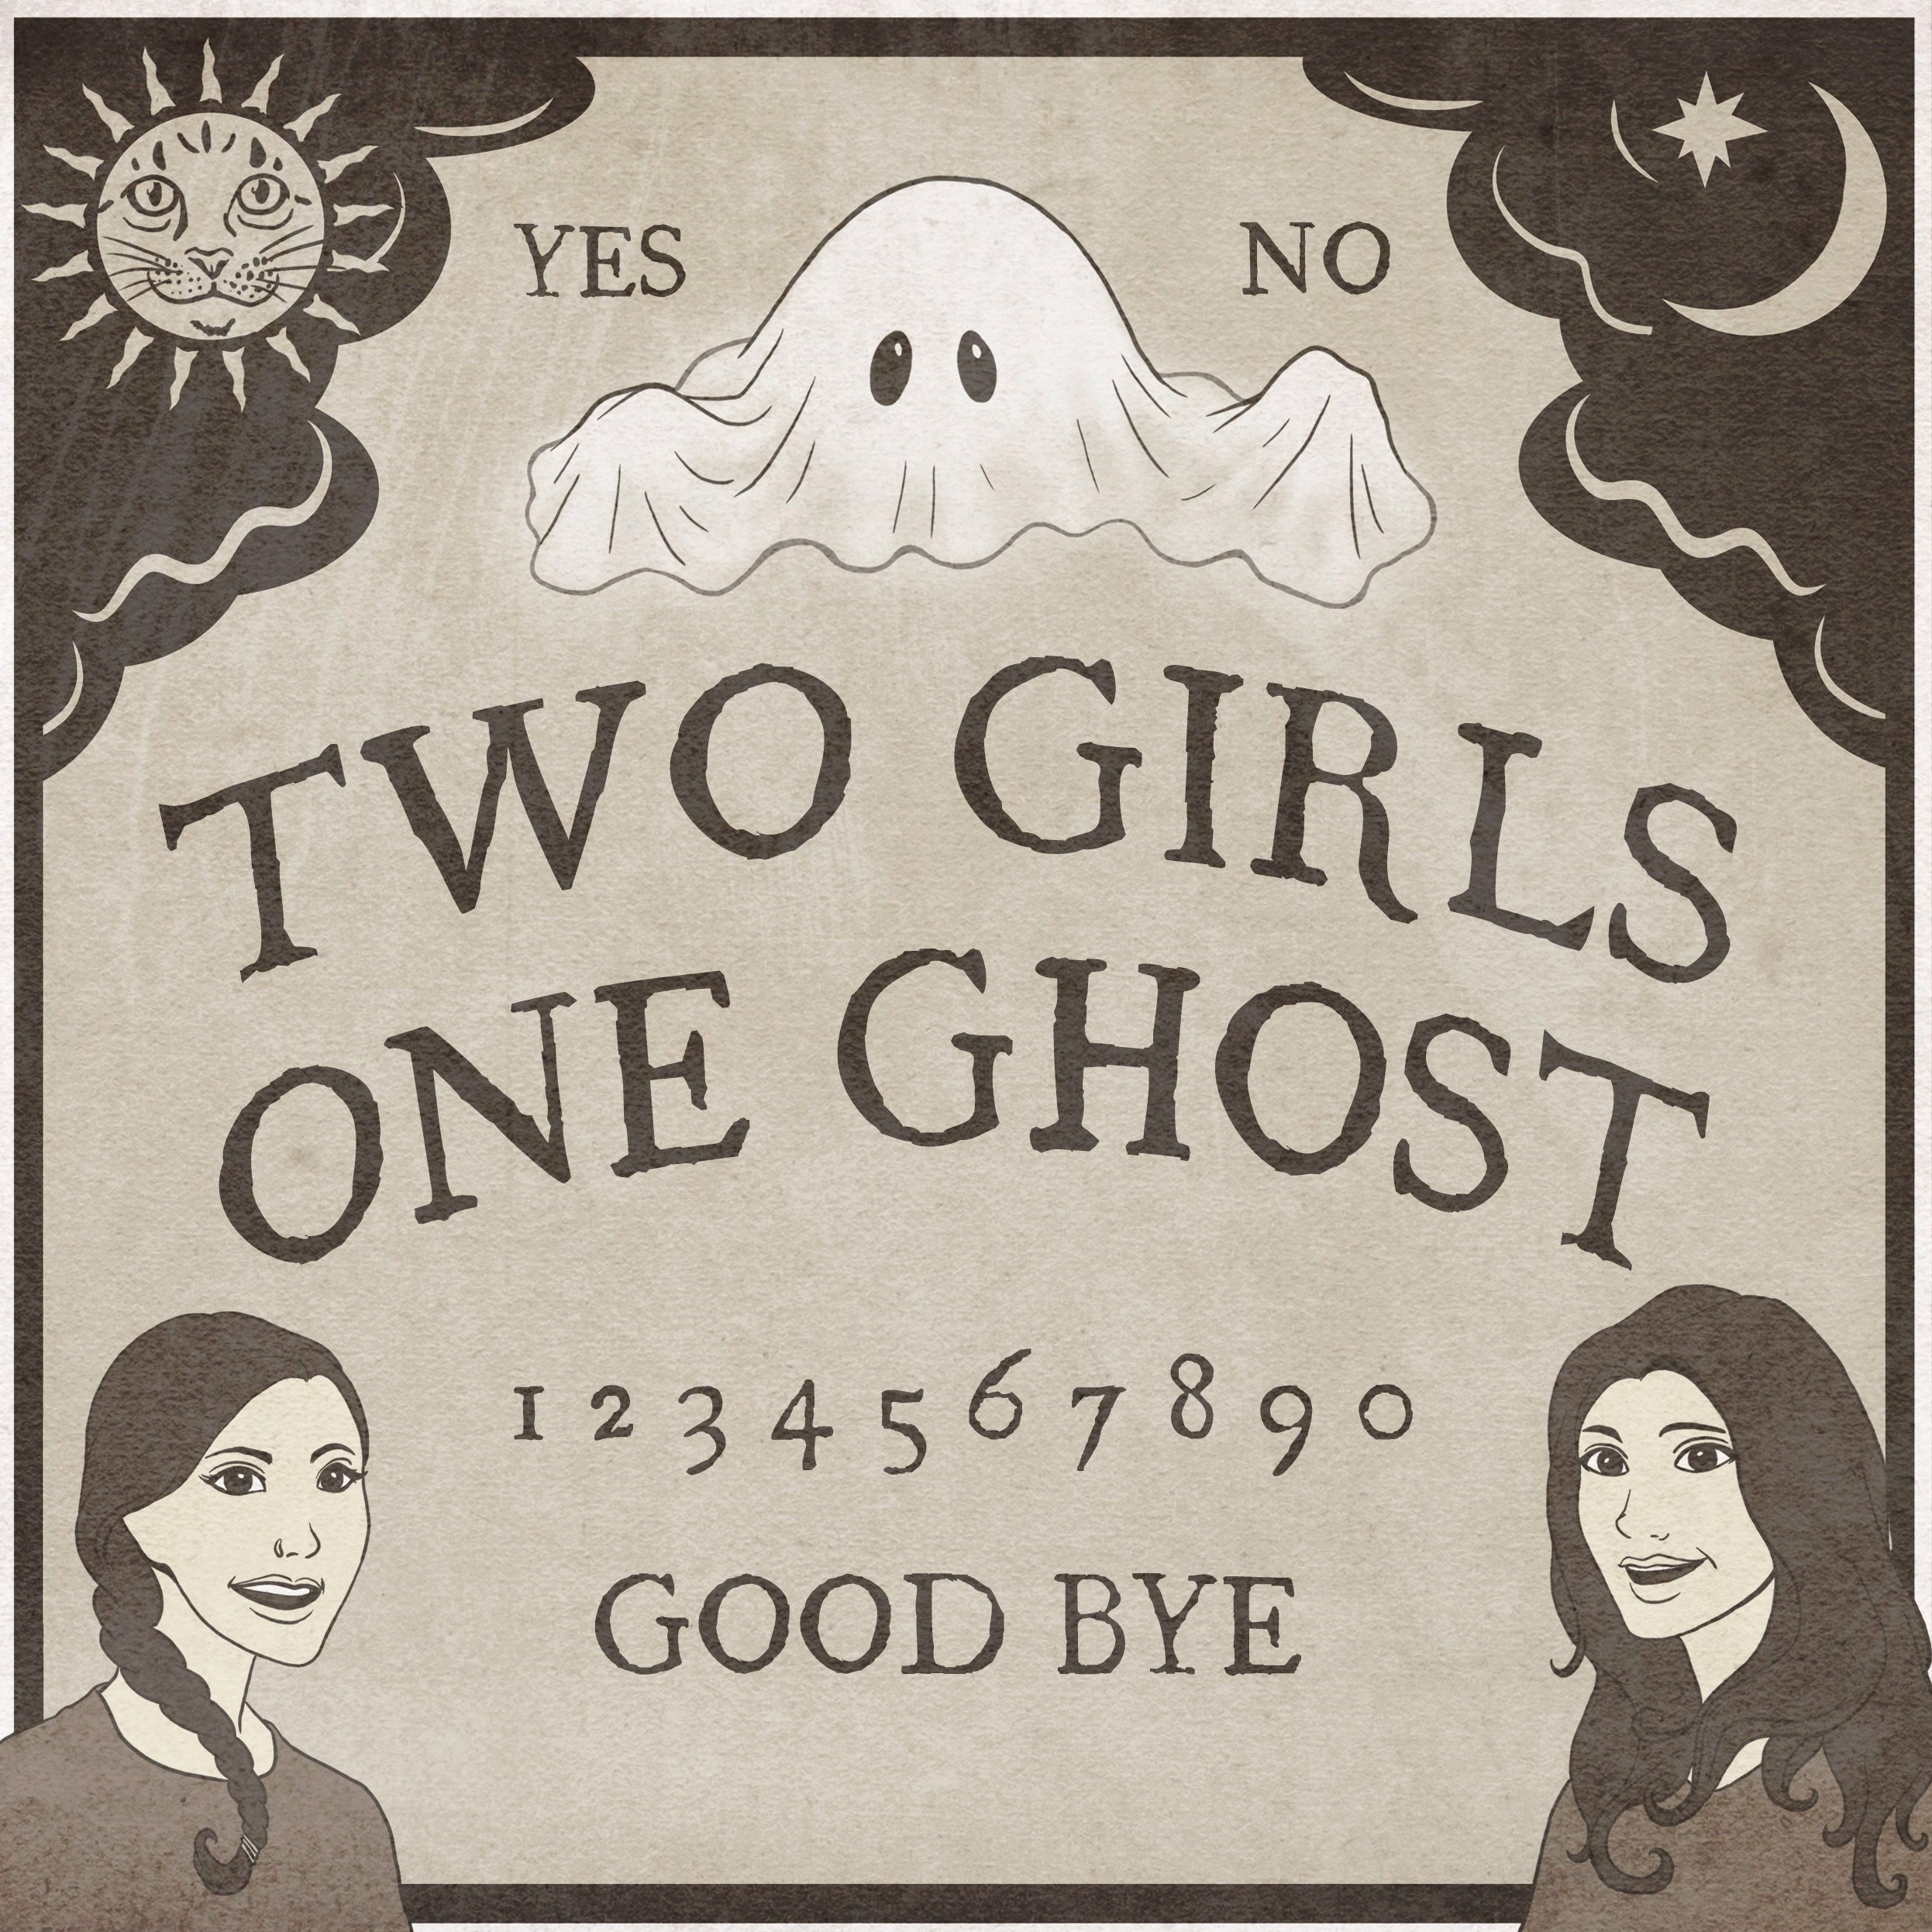 Two Girls One Ghost Logo with Corinne and Sabrina drawn on a modified ouiji board.